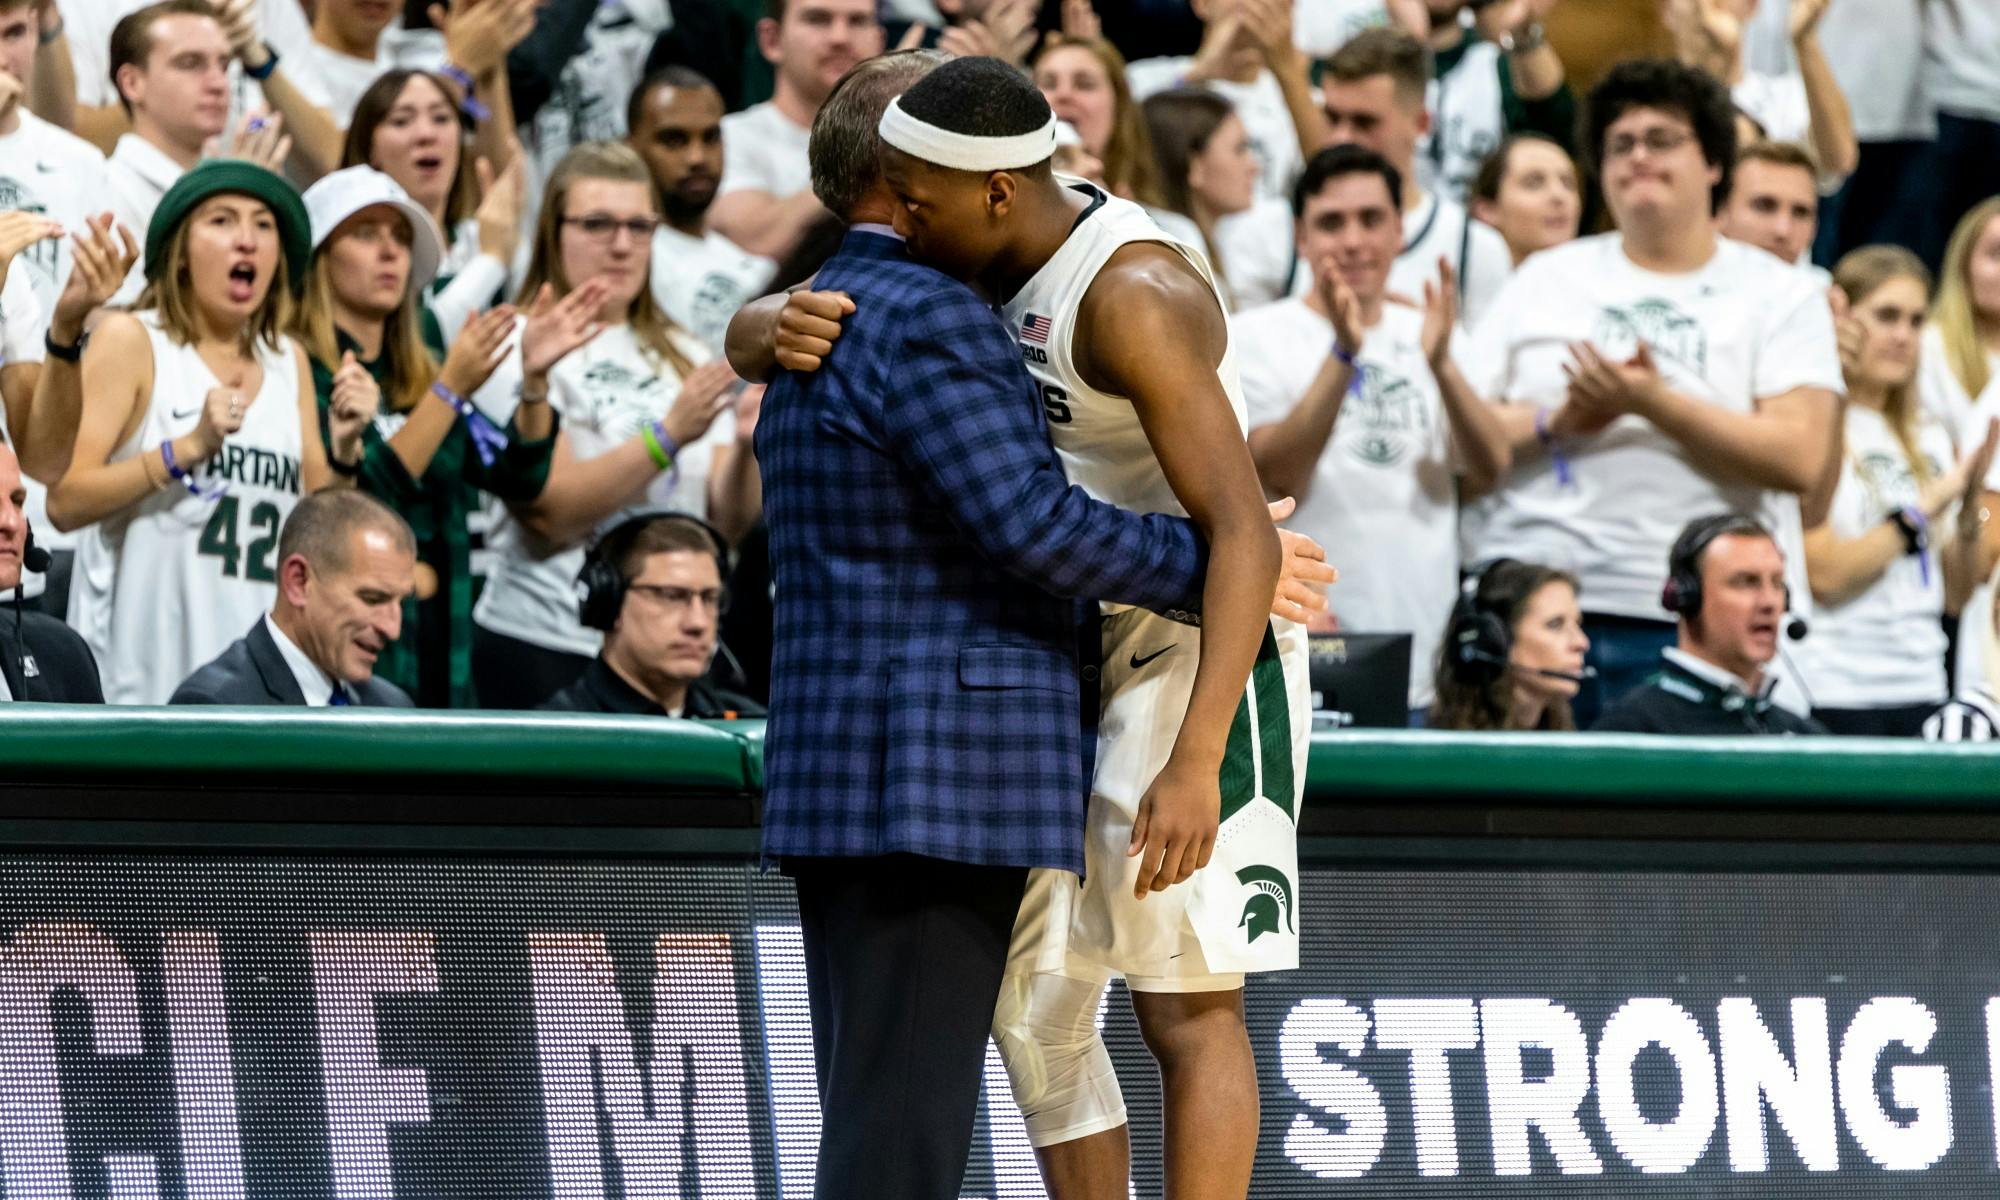 <p>Senior guard Cassius Winston (right) hugs coach Tom Izzo after being subbed out against Binghamton. The Spartans defeated the Bearcats 100-47 on Nov. 10, 2019 at the Breslin Student Events Center.</p>